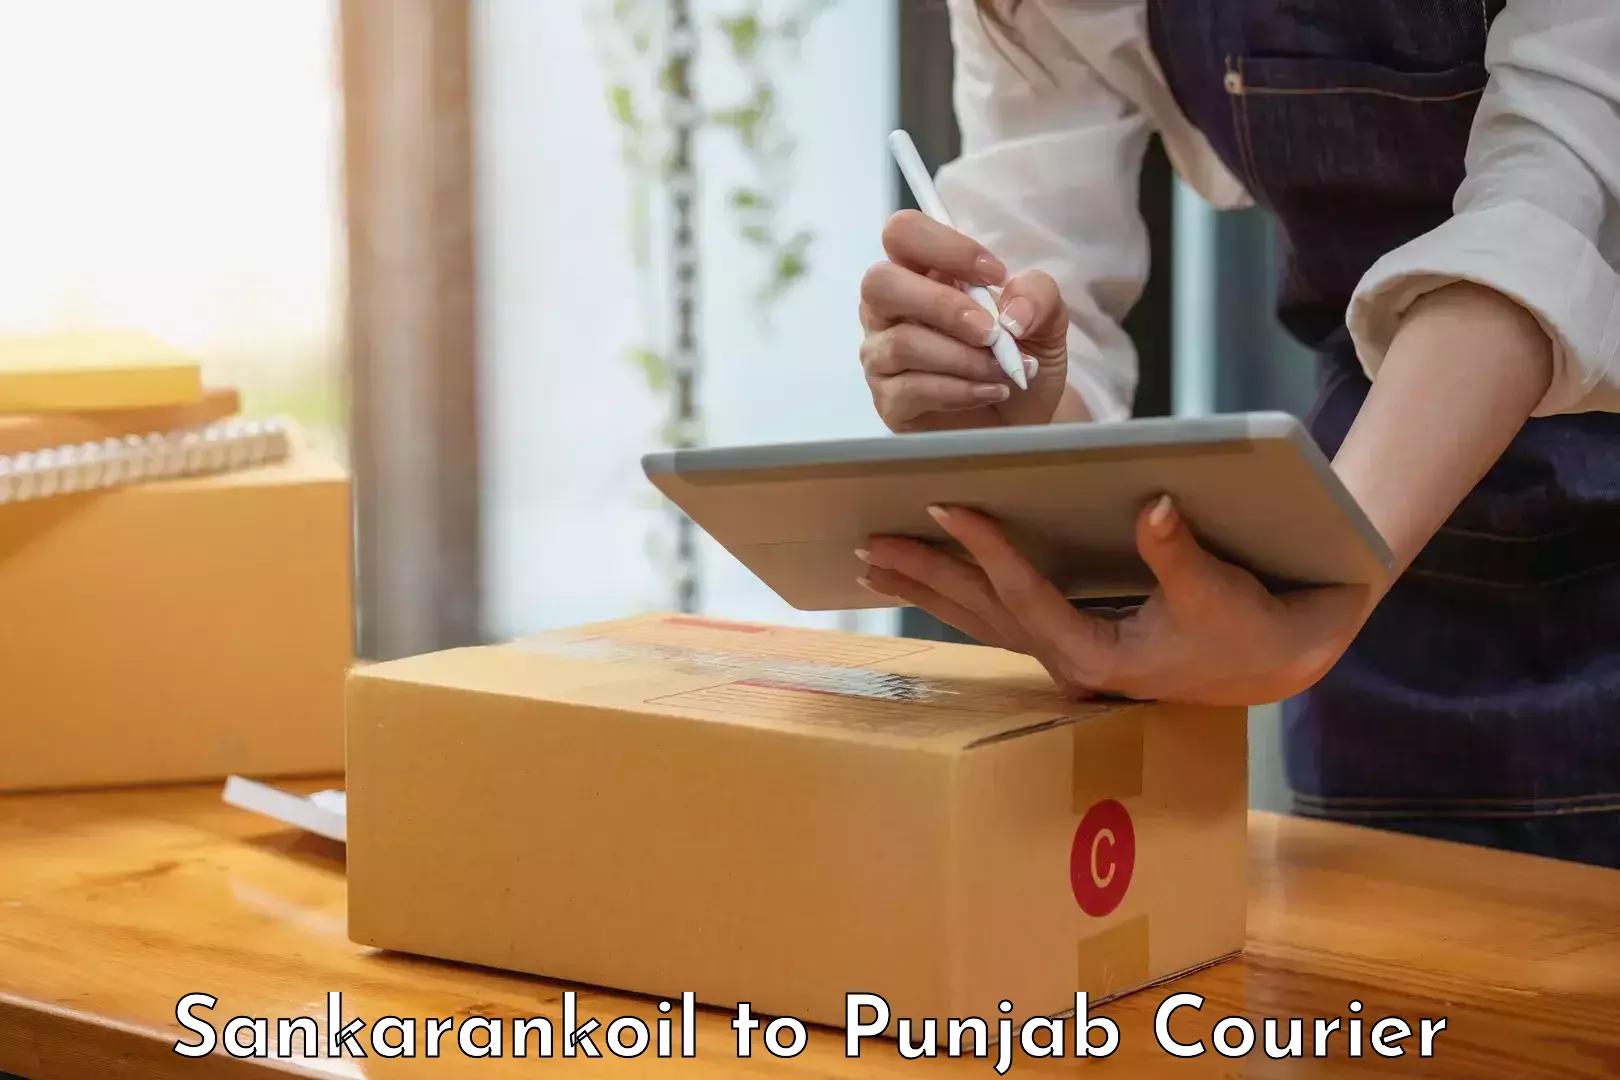 Full-service courier options Sankarankoil to Patiala